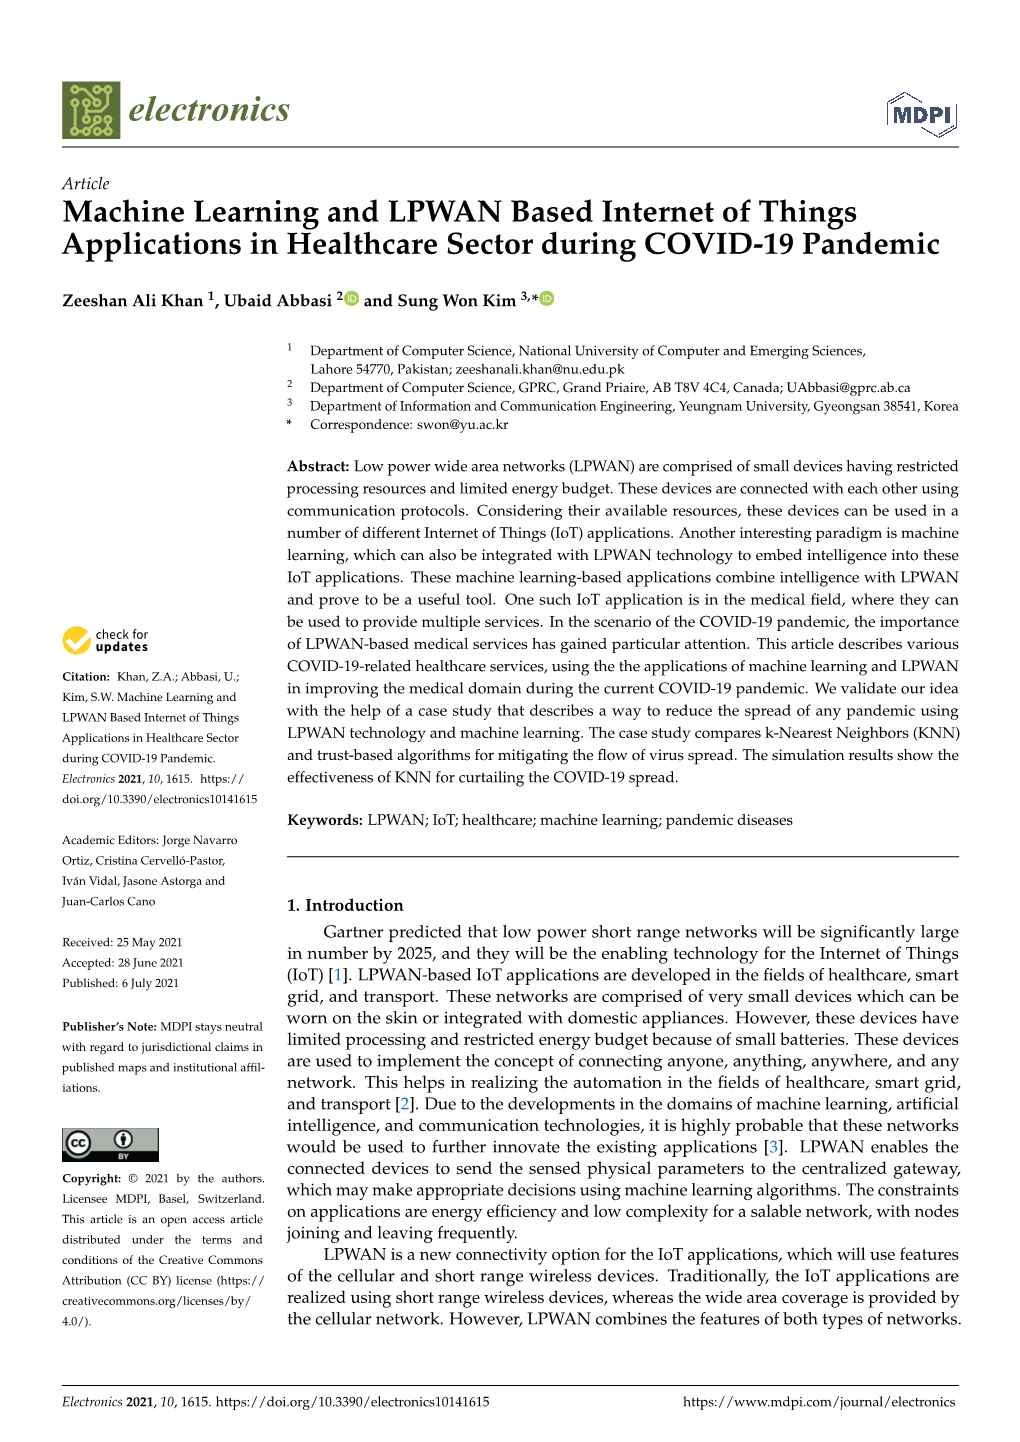 Machine Learning and LPWAN Based Internet of Things Applications in Healthcare Sector During COVID-19 Pandemic